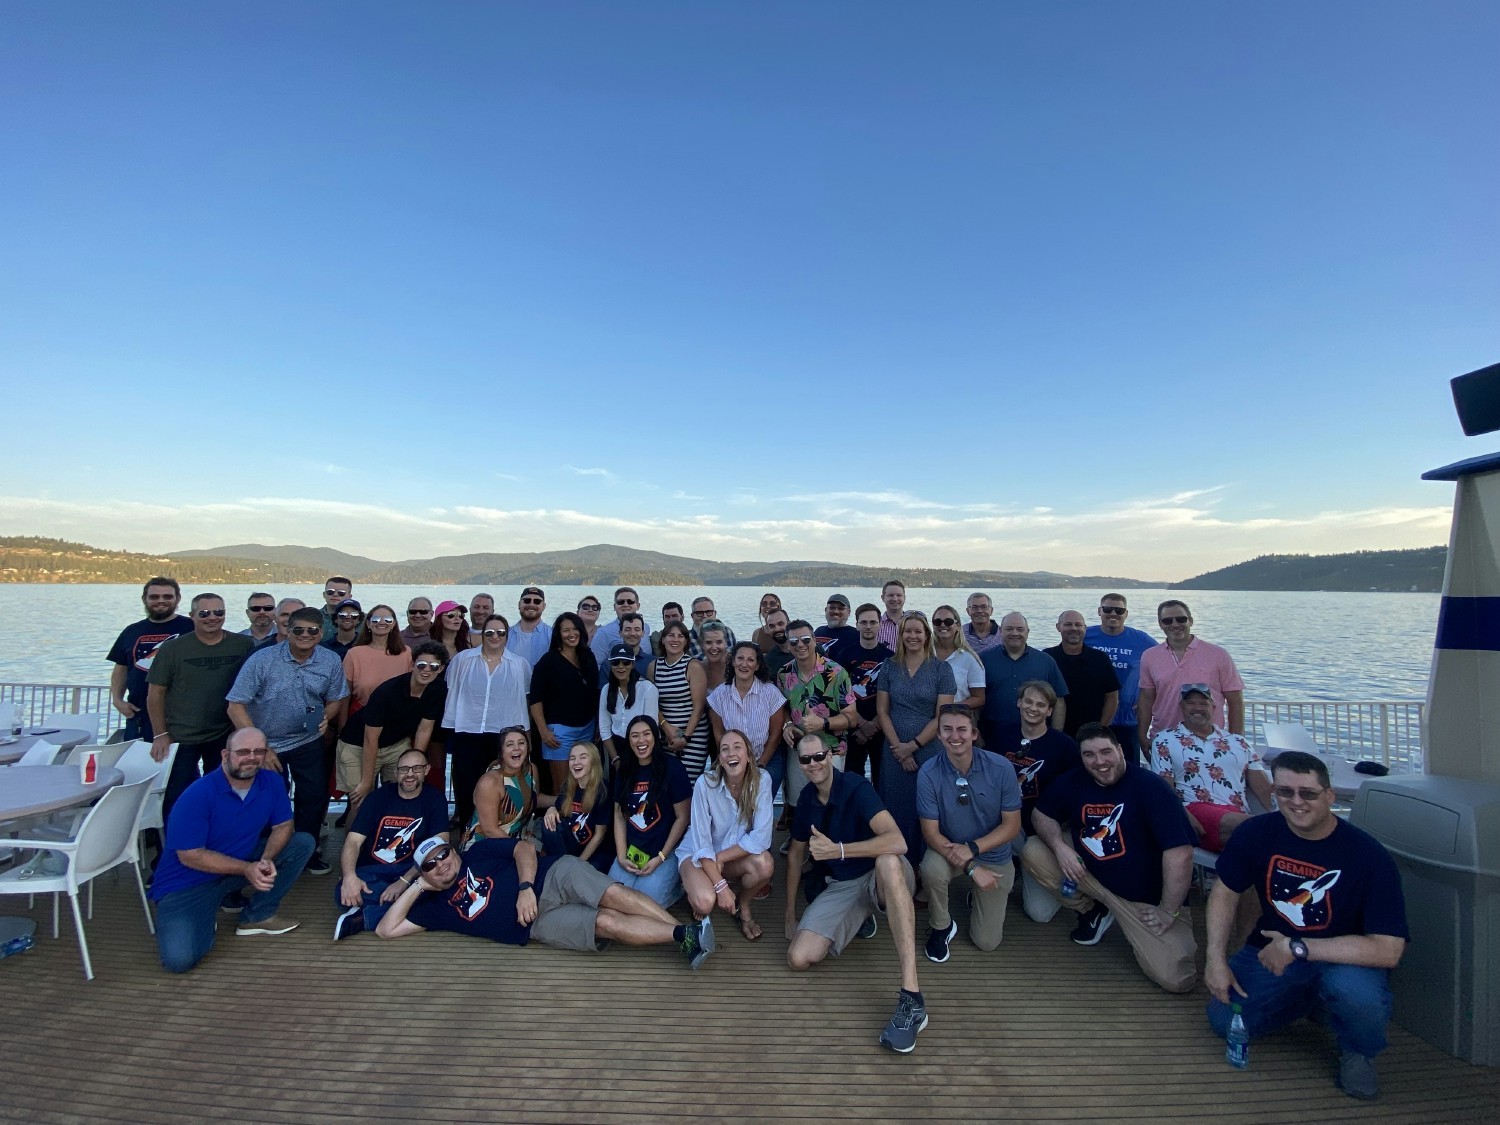 Team Vega on a dinner cruise on Lake Coeur d'Alene during our bi-annual all company gathering